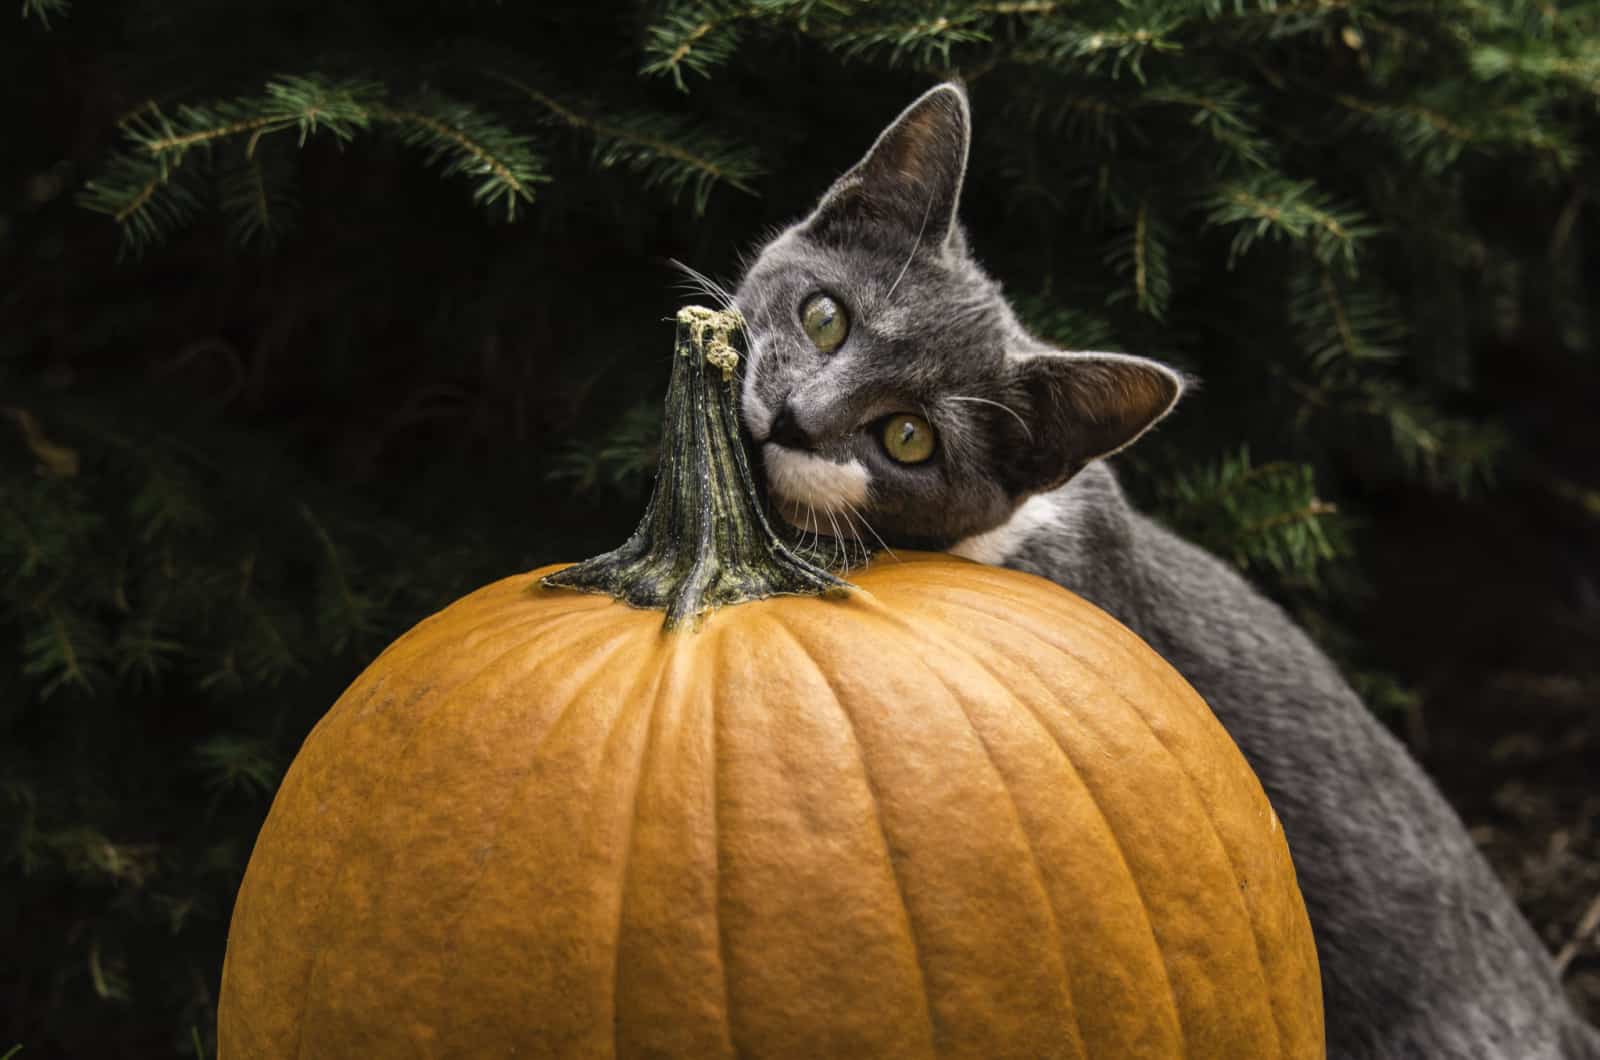 cat chewing on a pumpking